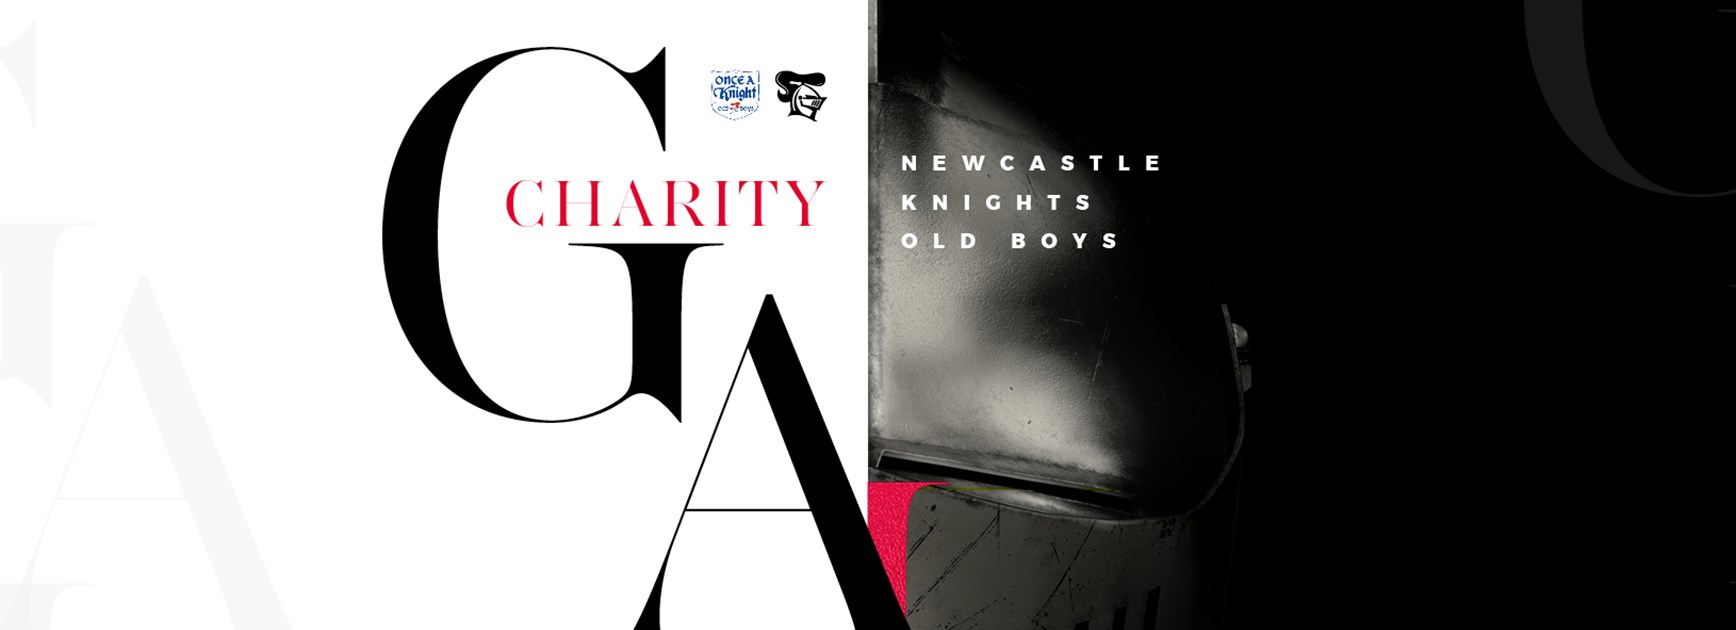 Secure your seat at the 2021 Newcastle Knights Old Boys Charity Gala